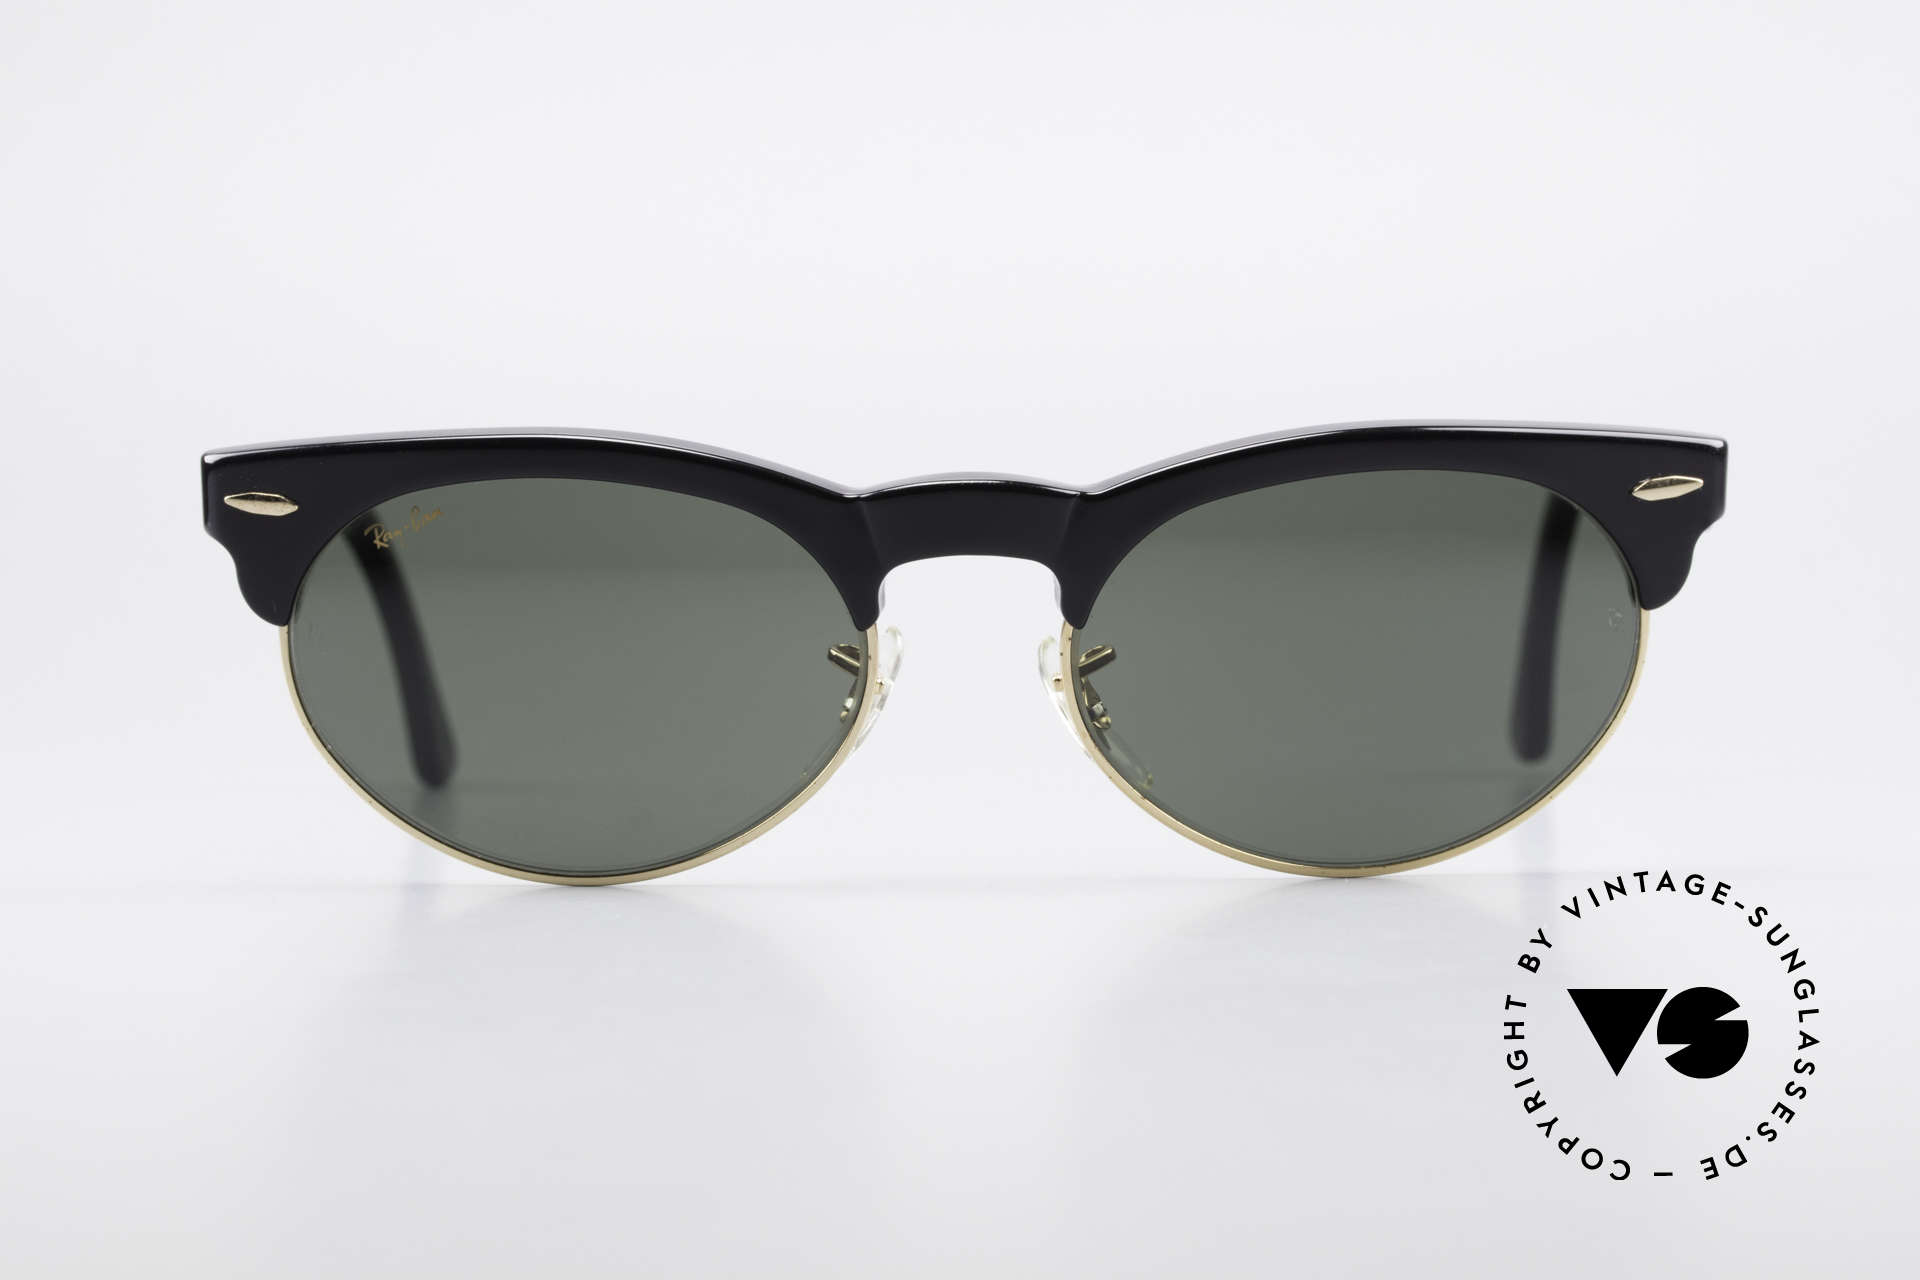 bausch & lomb ray ban